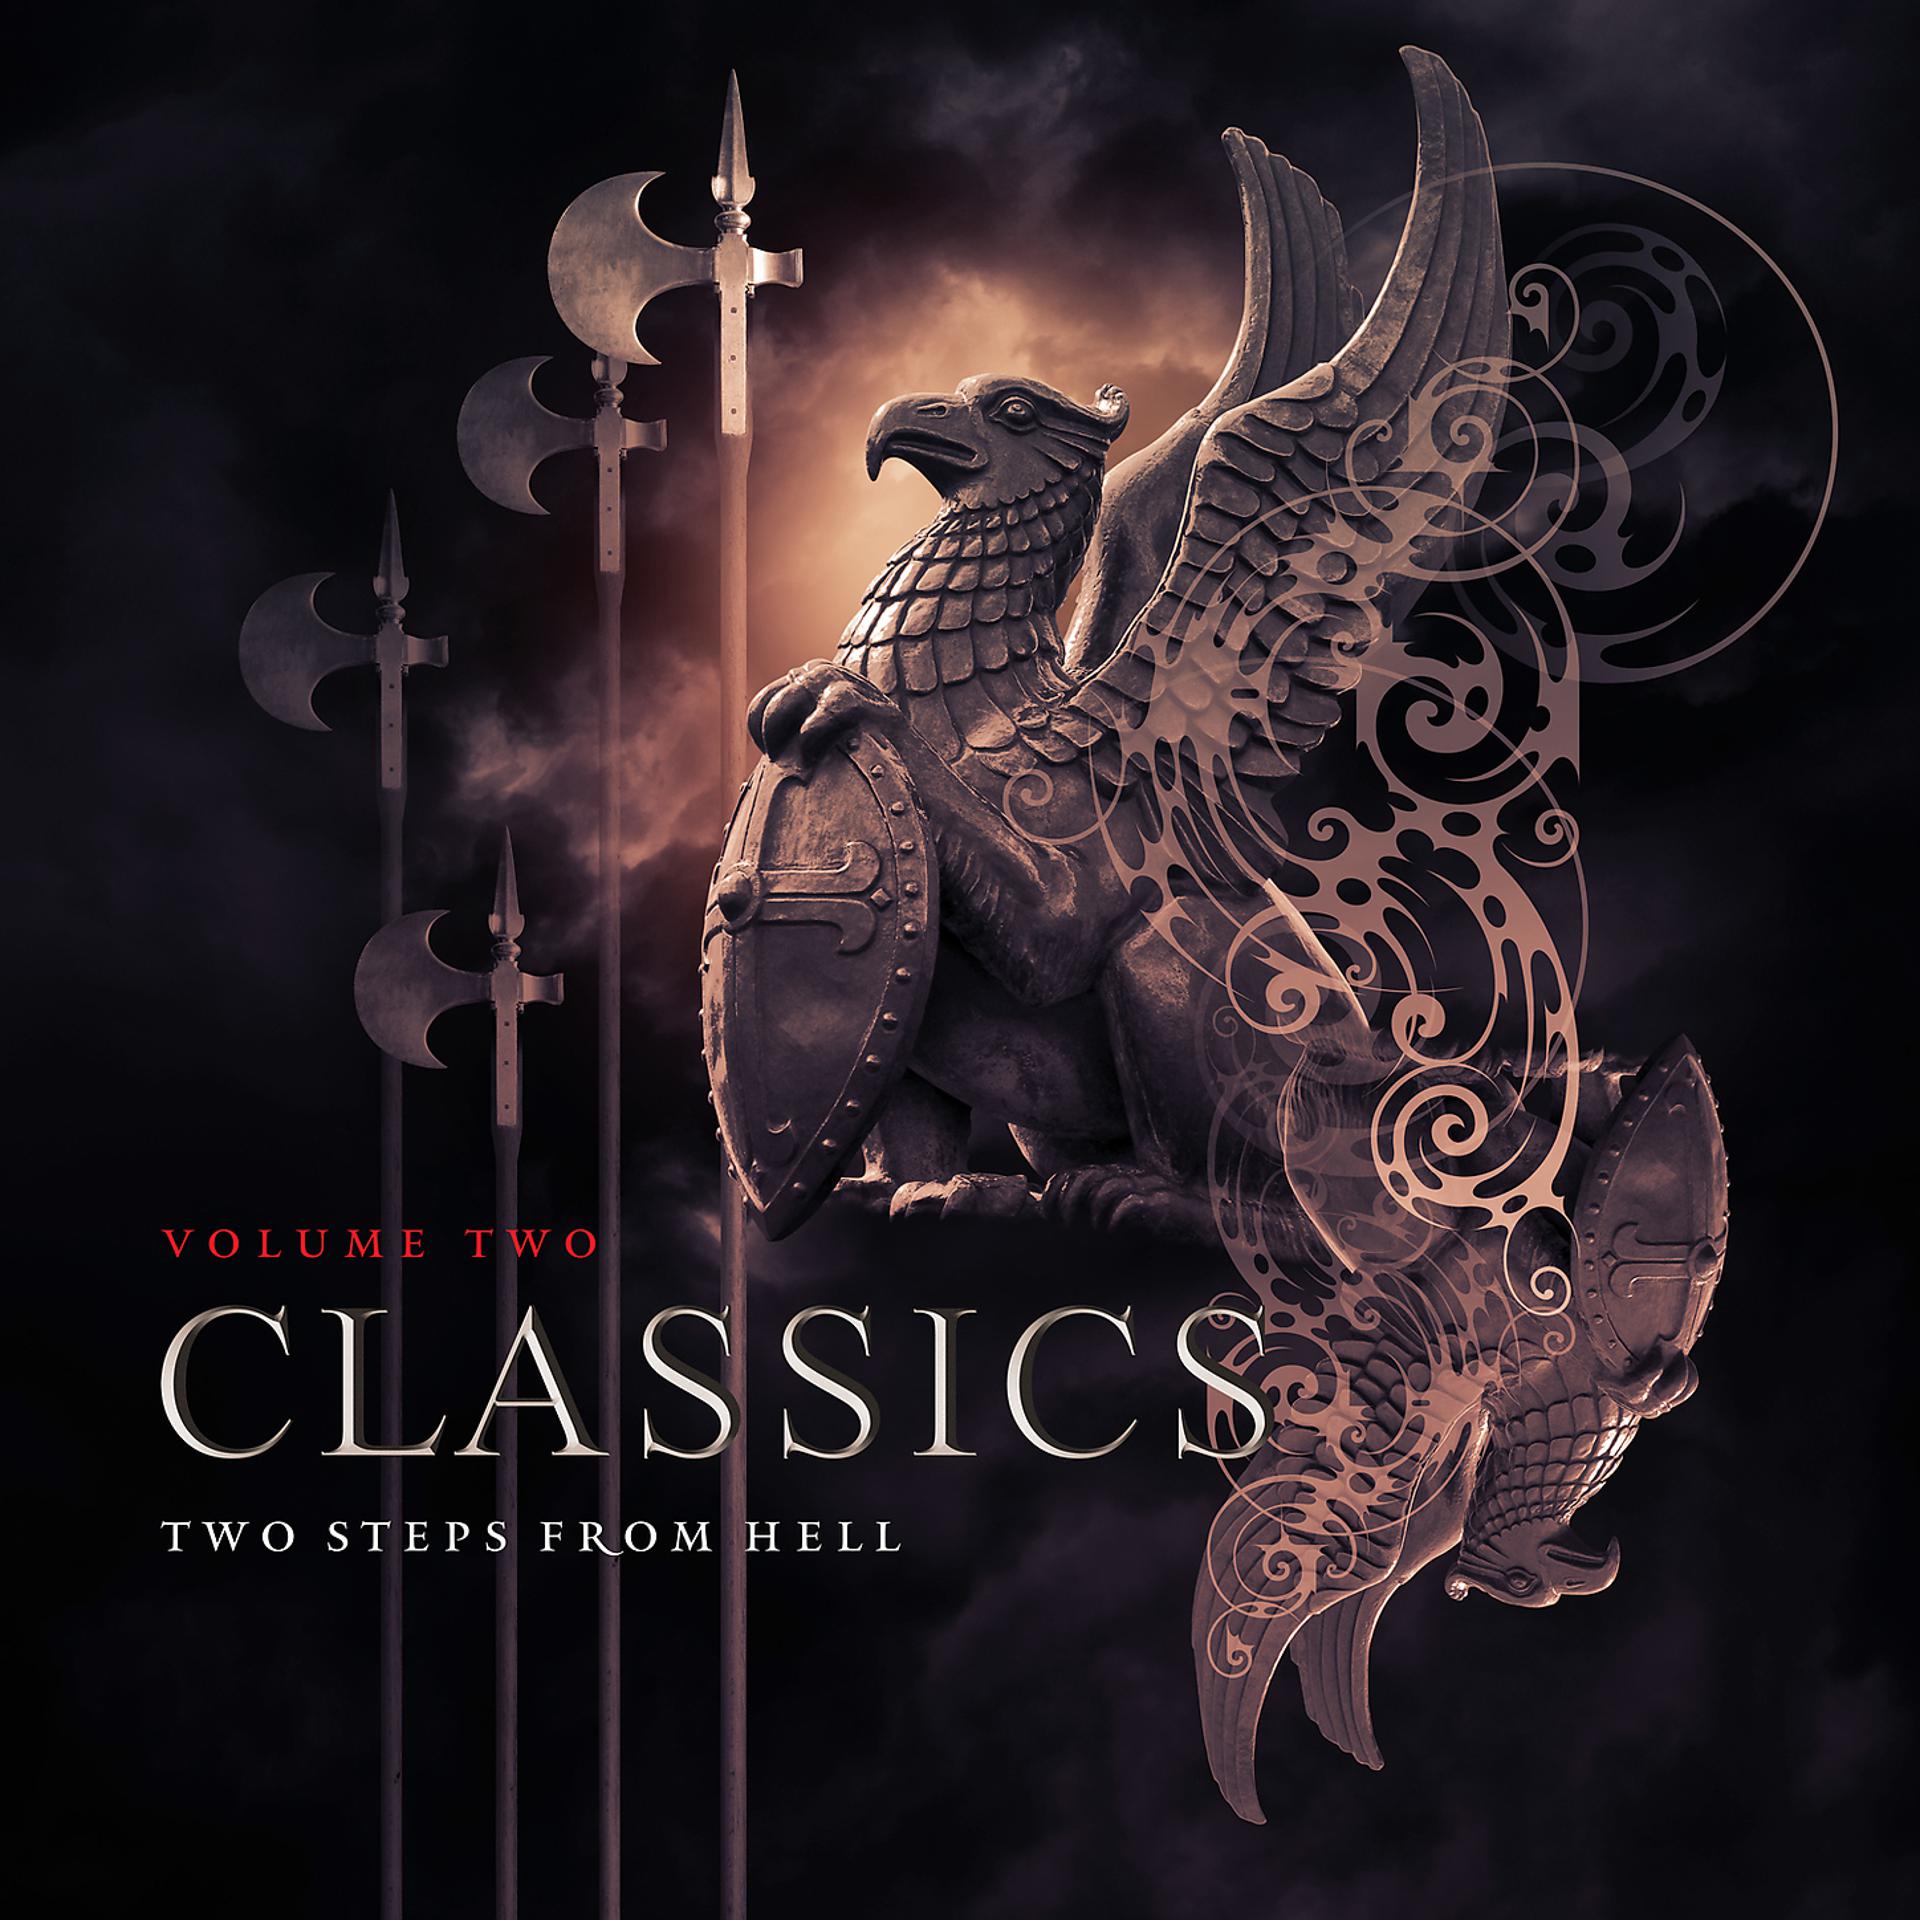 Two step from the hell. Thomas Bergersen two steps from Hell album. Two steps from Hell Classics Vol 2. Two steps from Hell - Classics Volume two. Two steps from Hell обложка.